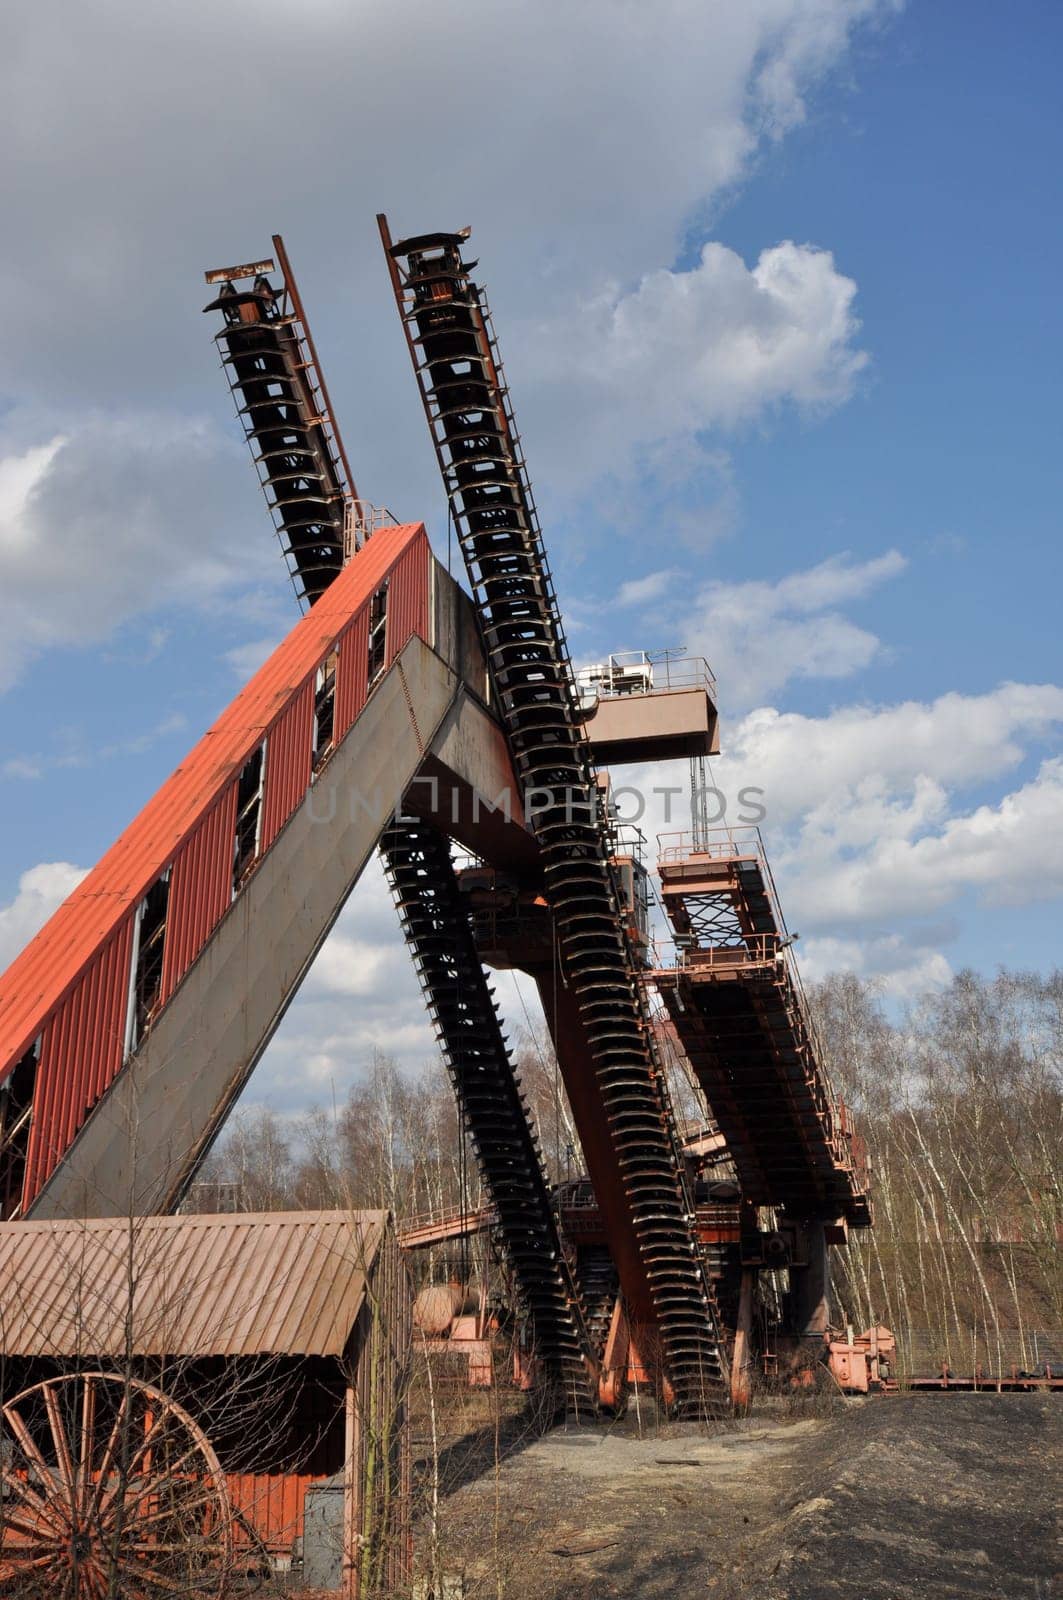 Old conveyor system at the former coking plant at the Zollverein colliery in Essen, Germany